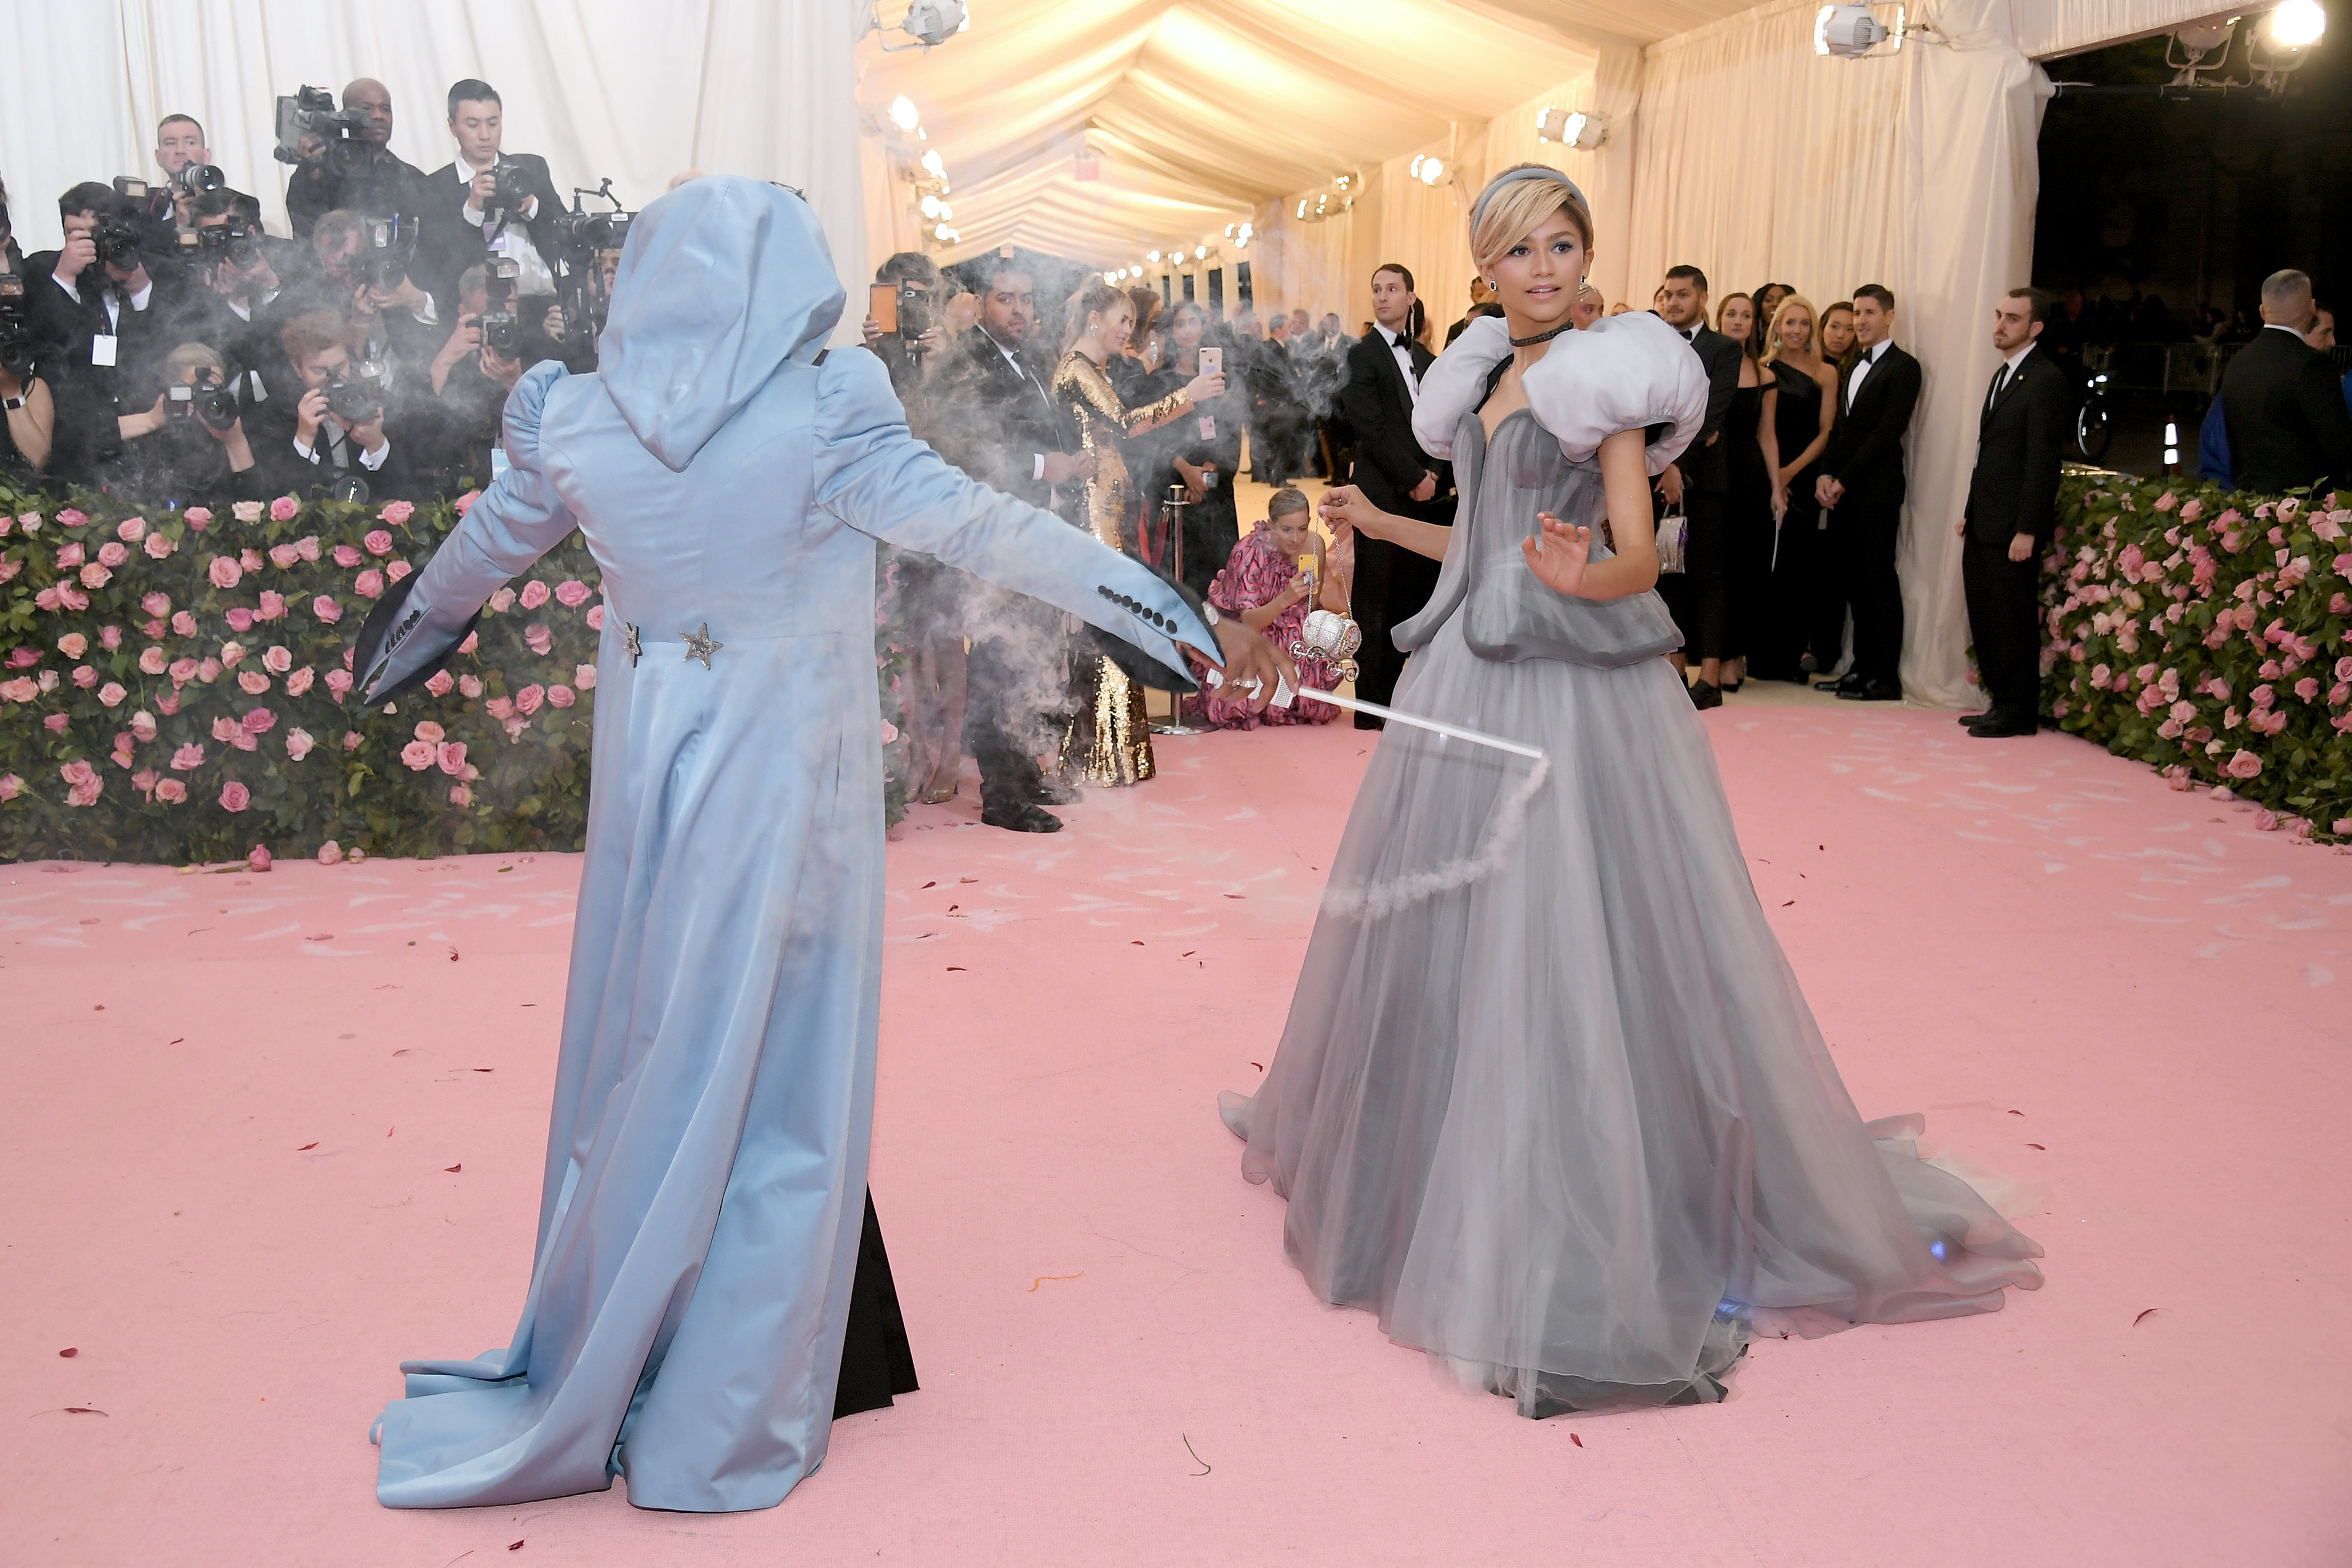 Zendaya dressed in a Cinderella-inspired gown with Law Roach dressed as her Fairy Godmother wielding a wand to transform the dress